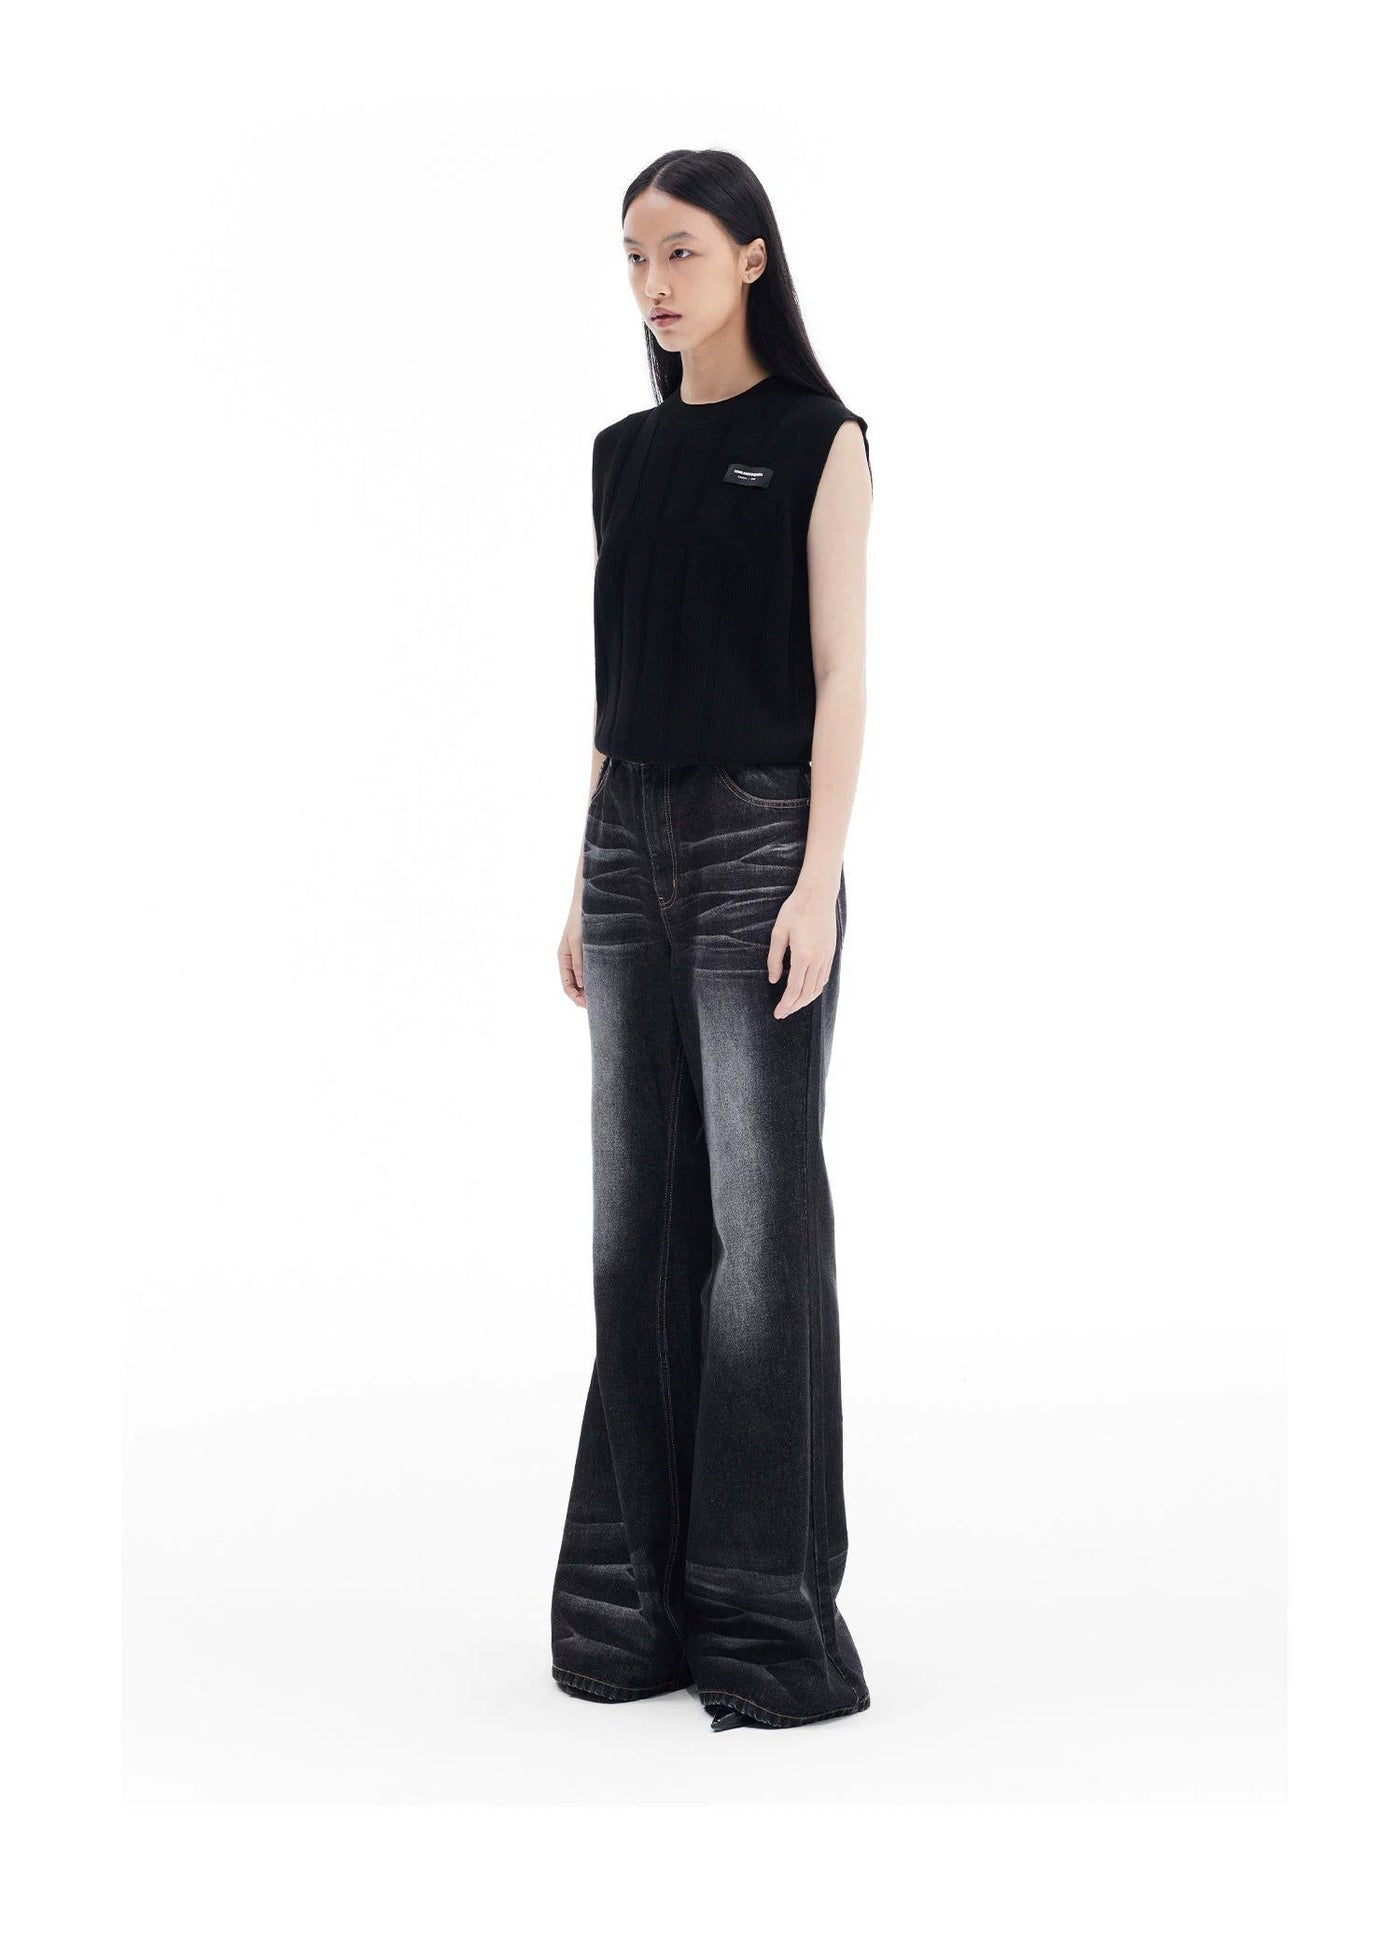 Whiskered Ends Flare Jeans Korean Street Fashion Jeans By Terra Incognita Shop Online at OH Vault